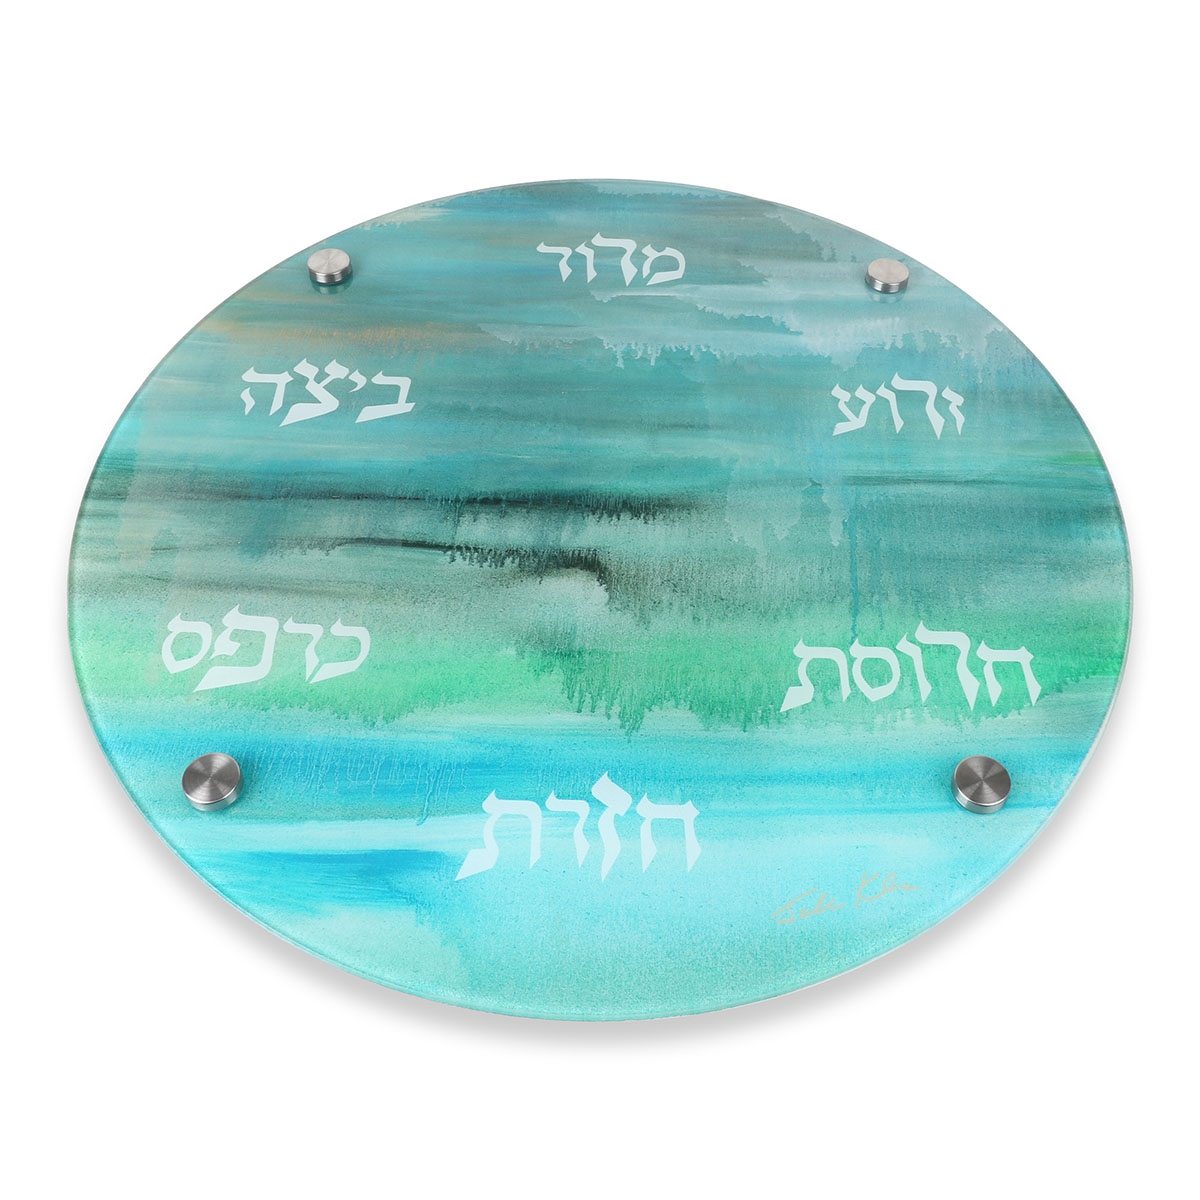 Glass Seder Plate With Water's Reflection Design By Jordana Klein - 1